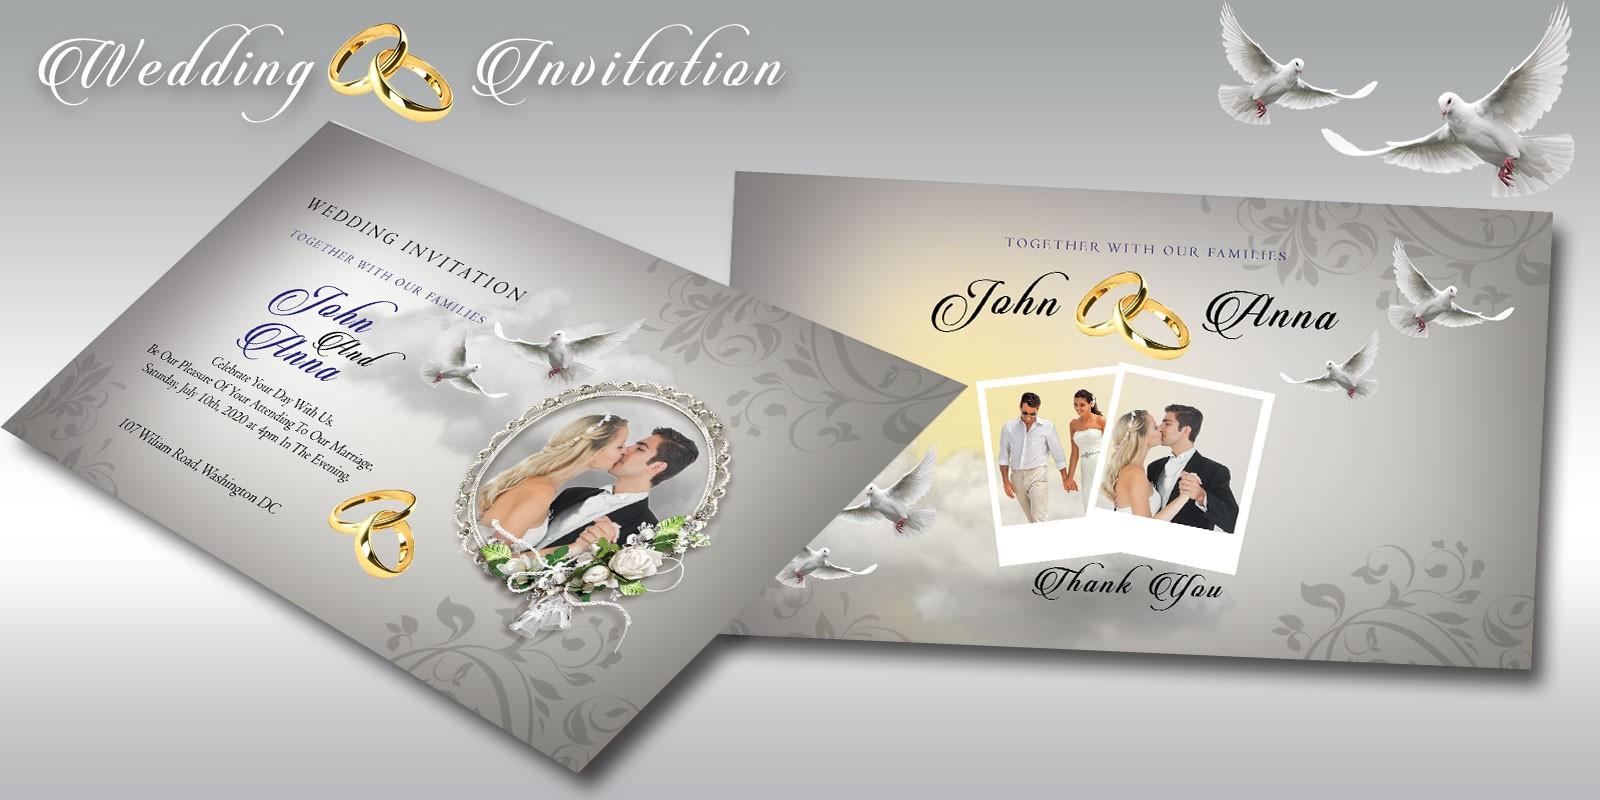 Wedding Invitation Flyer Template by CKArtStudio  Codester Pertaining To Wedding Invitation Flyer Template Throughout Wedding Invitation Flyer Template